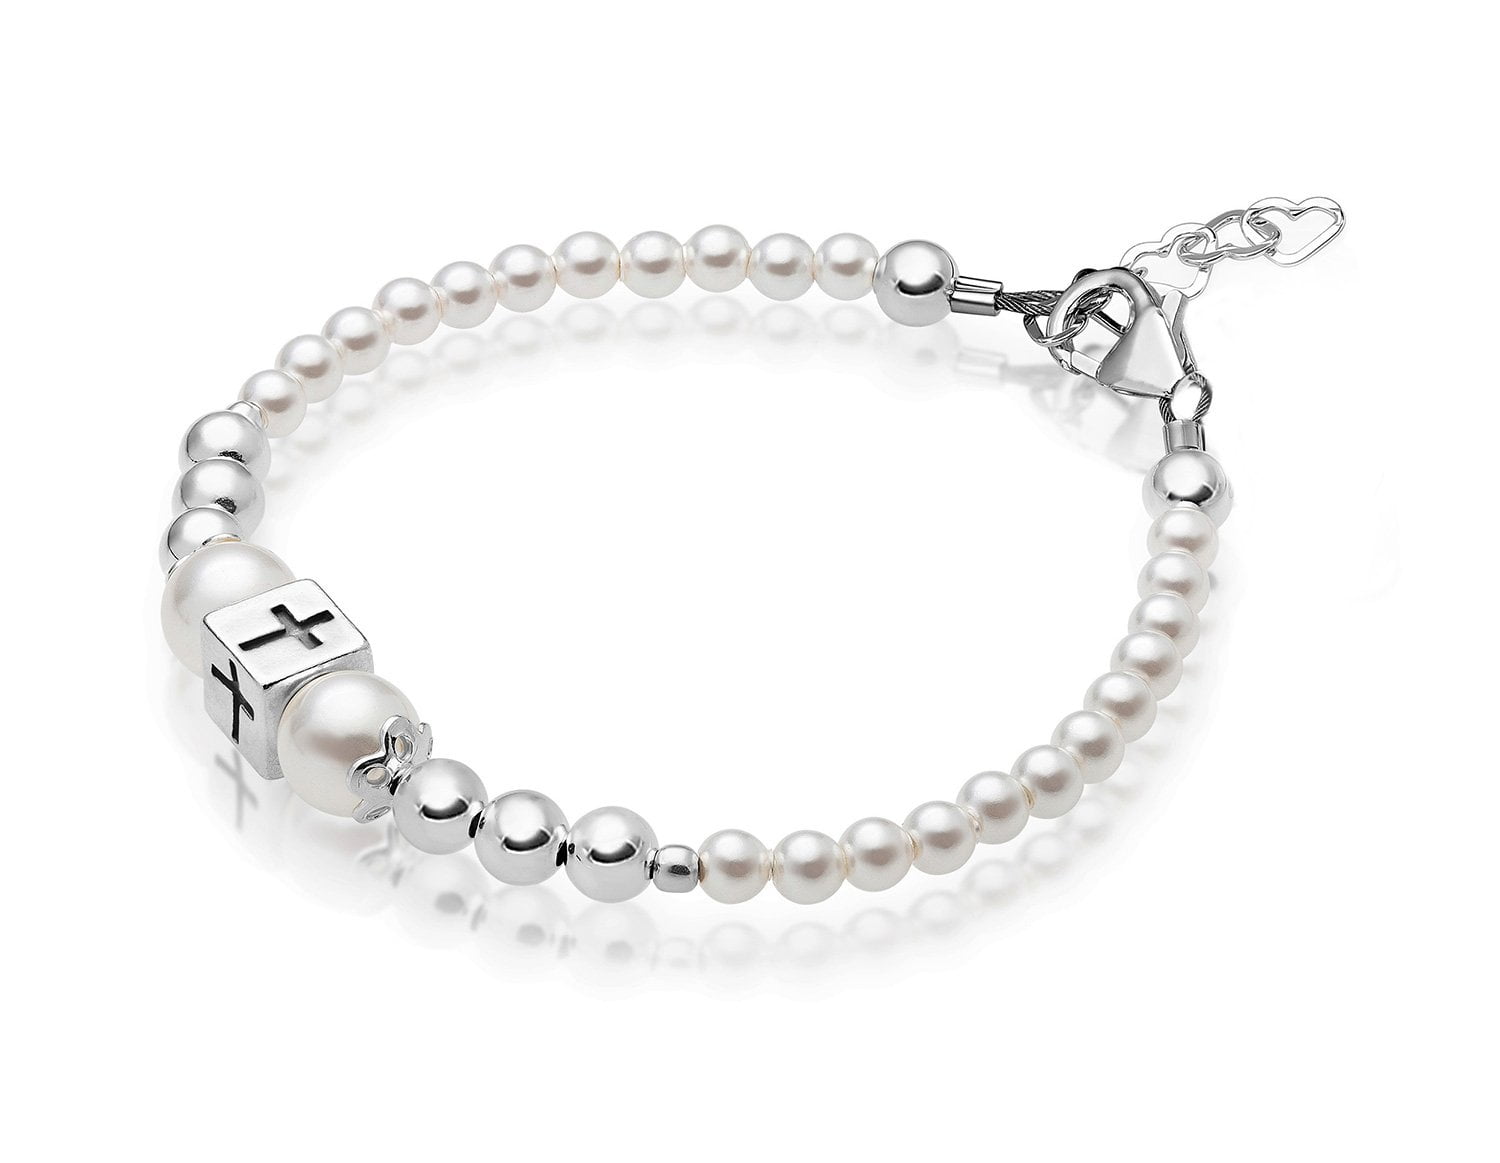 Girls Jewelry Birthday Gift Sterling Silver Cross Charm Girls Bracelet with European Crystals and simulated White Pearls Baptism Gifts for Girl Baby Crystals Pearl Bracelets for Girls